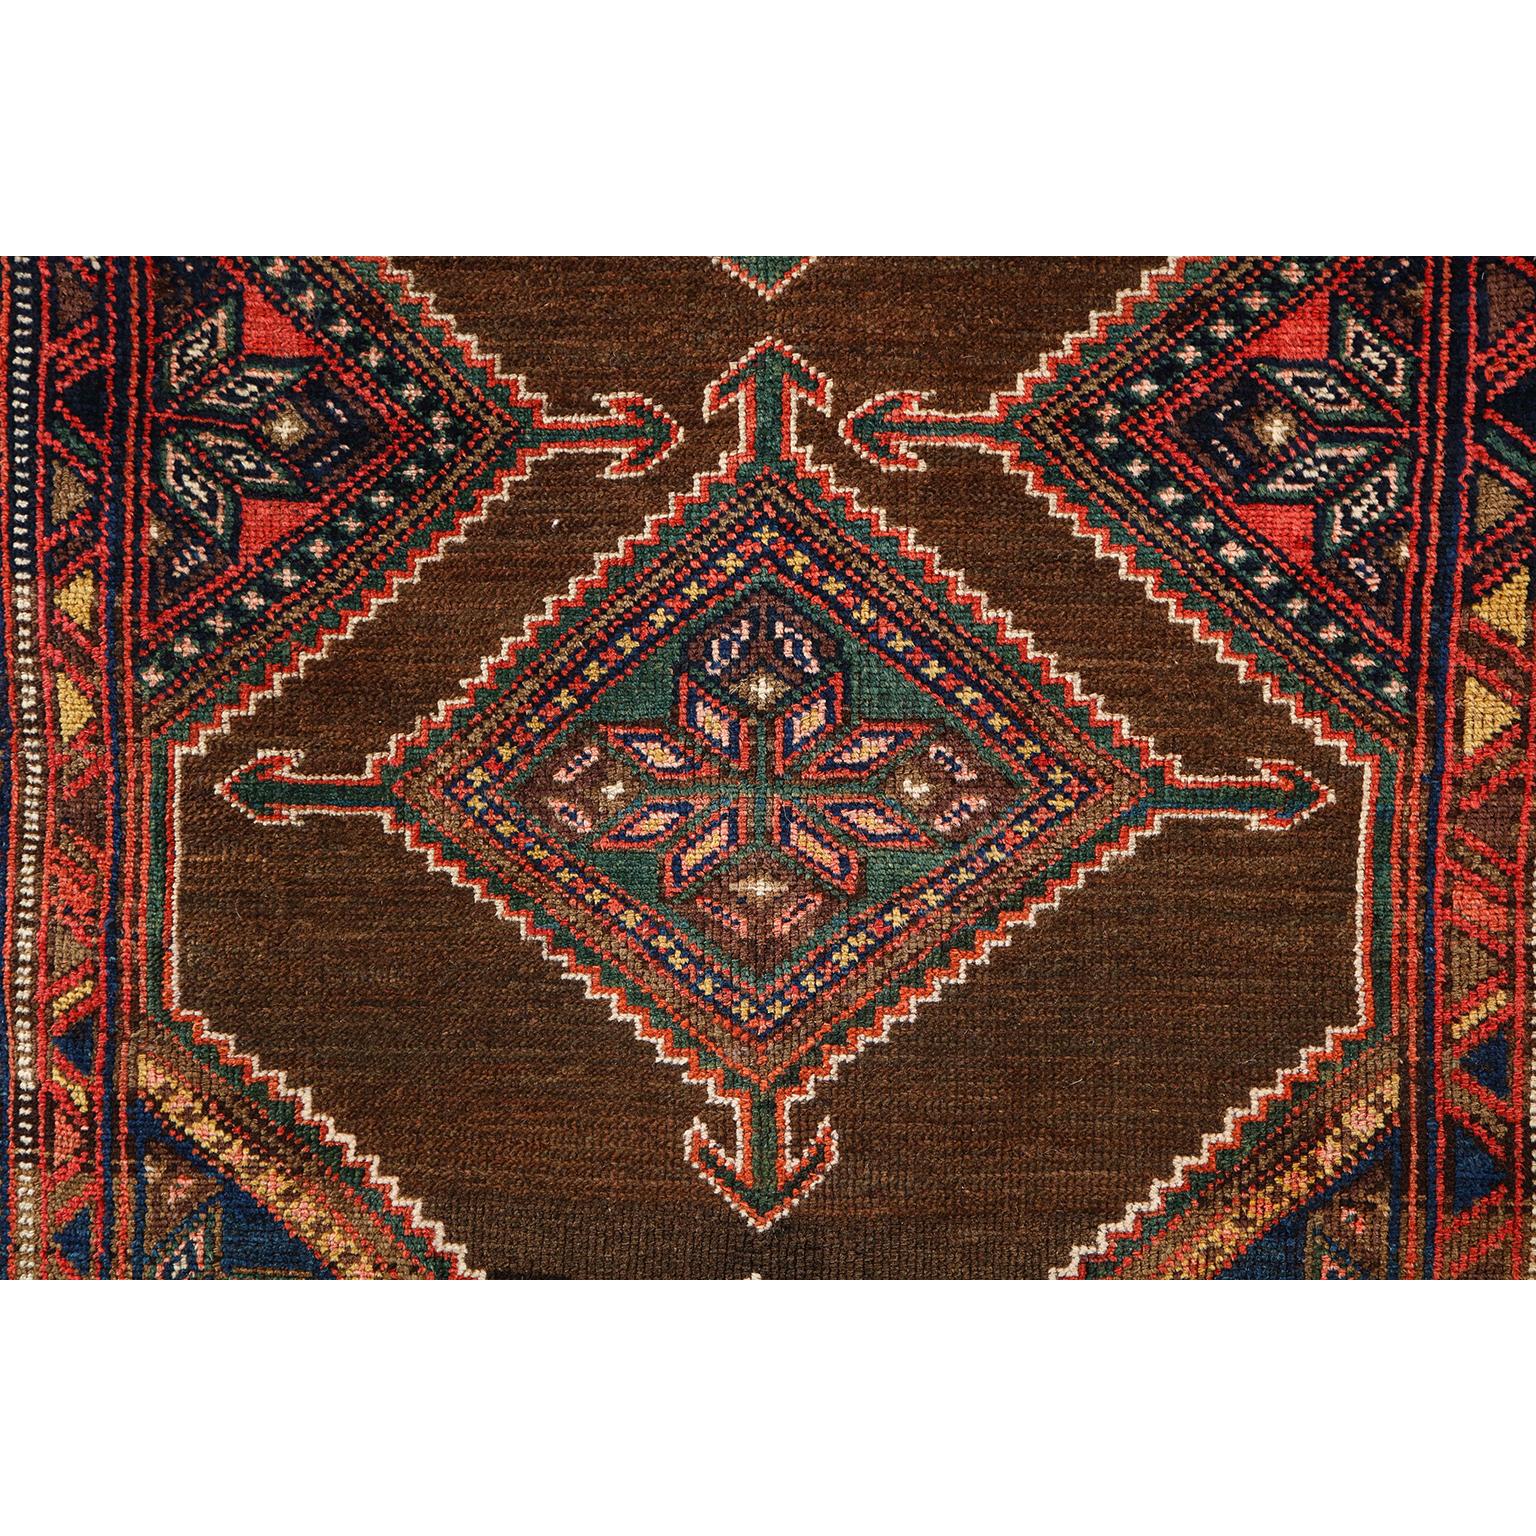 Antique 1900s  Wool Persian Seraband Rug, 3' x 6' In Good Condition For Sale In New York, NY